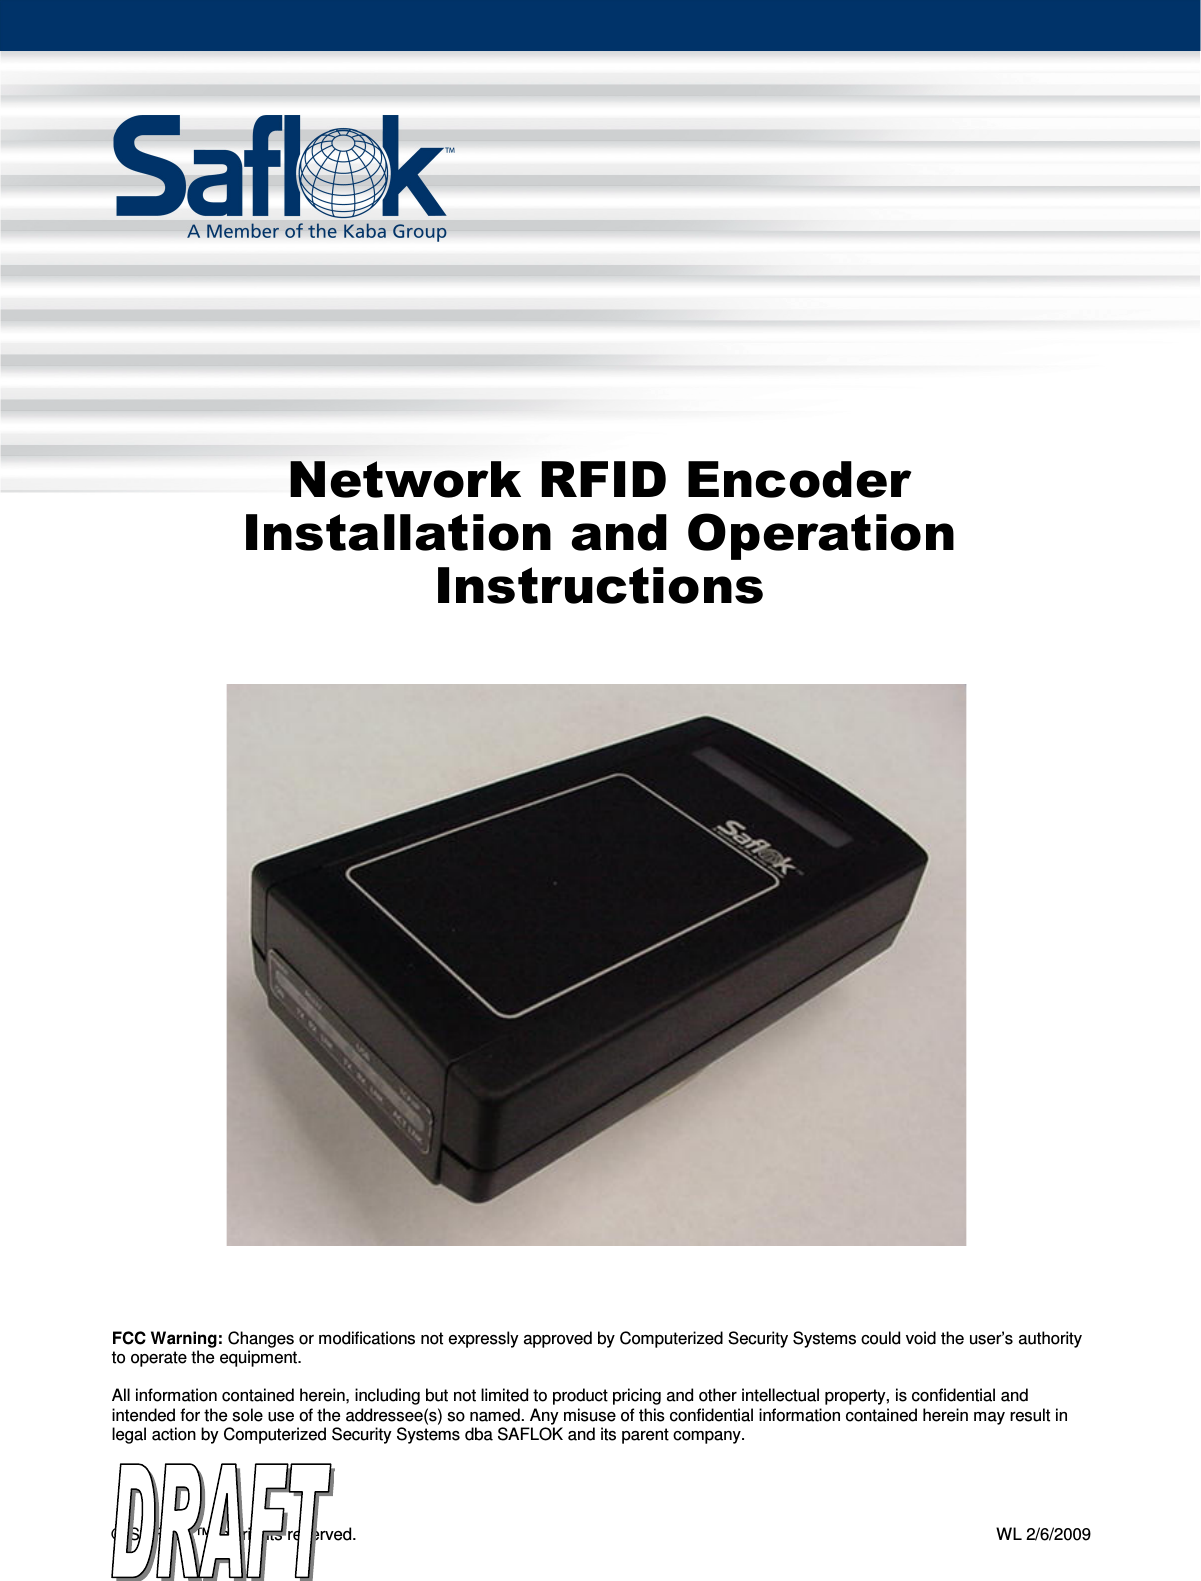 Network RFID Encoder Installation and Operation Instructions  Pg. 1 of 13 © SAFLOK™, all rights reserved.    WL 2/6/2009      Network RFID Encoder Installation and Operation Instructions                                      FCC Warning: Changes or modifications not expressly approved by Computerized Security Systems could void the user’s authority to operate the equipment.  All information contained herein, including but not limited to product pricing and other intellectual property, is confidential and intended for the sole use of the addressee(s) so named. Any misuse of this confidential information contained herein may result in legal action by Computerized Security Systems dba SAFLOK and its parent company.  